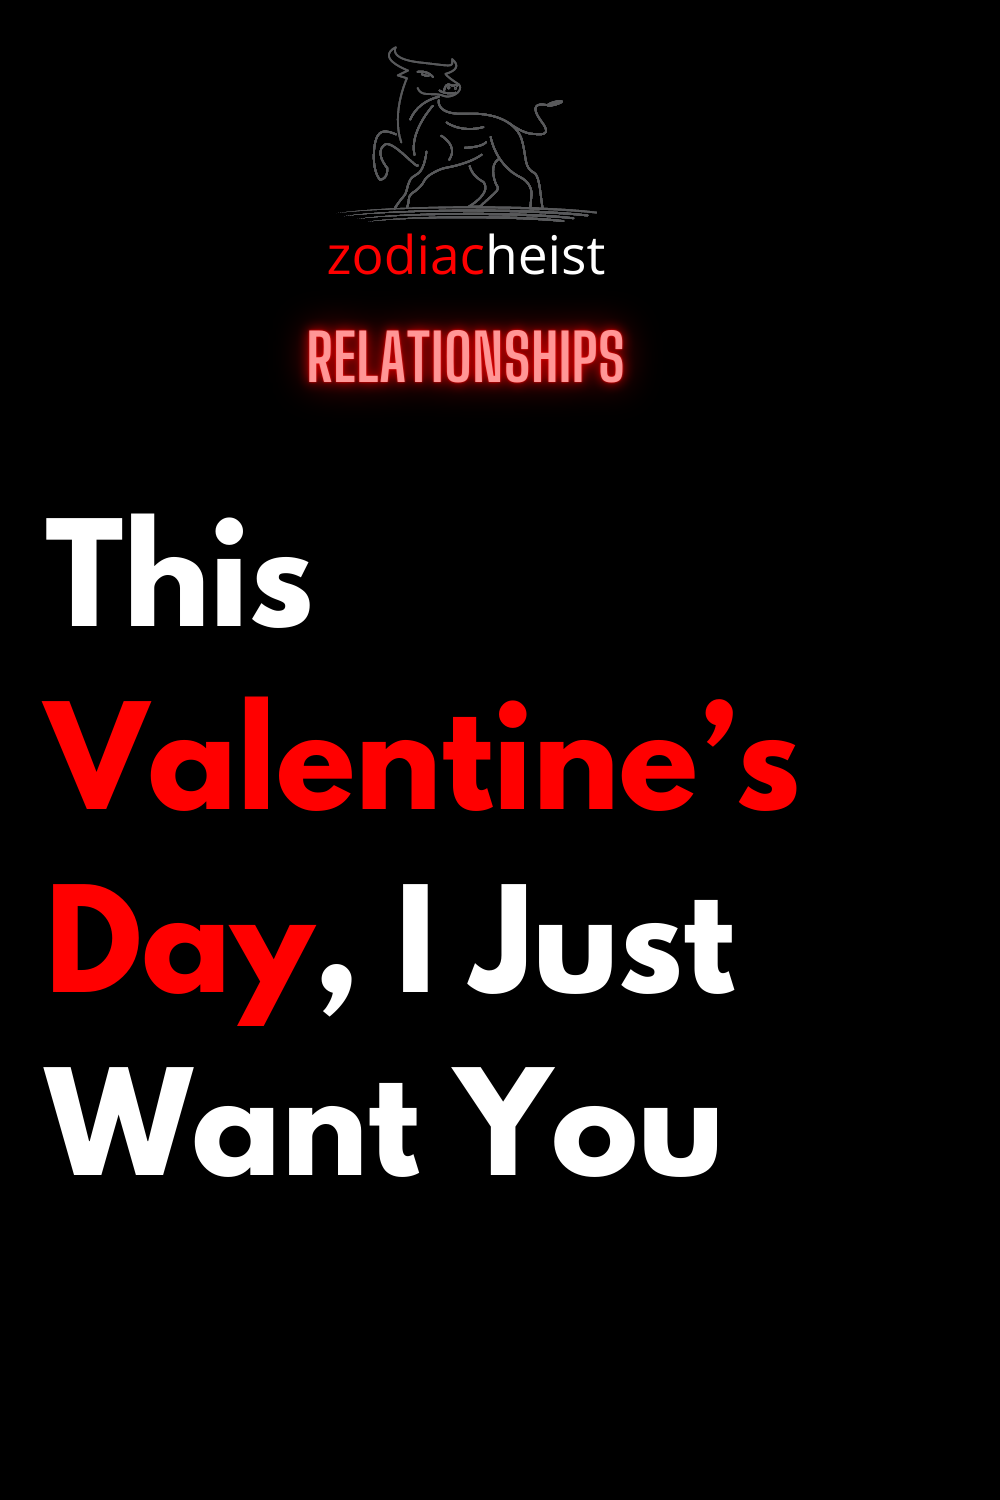 This Valentine’s Day, I Just Want You